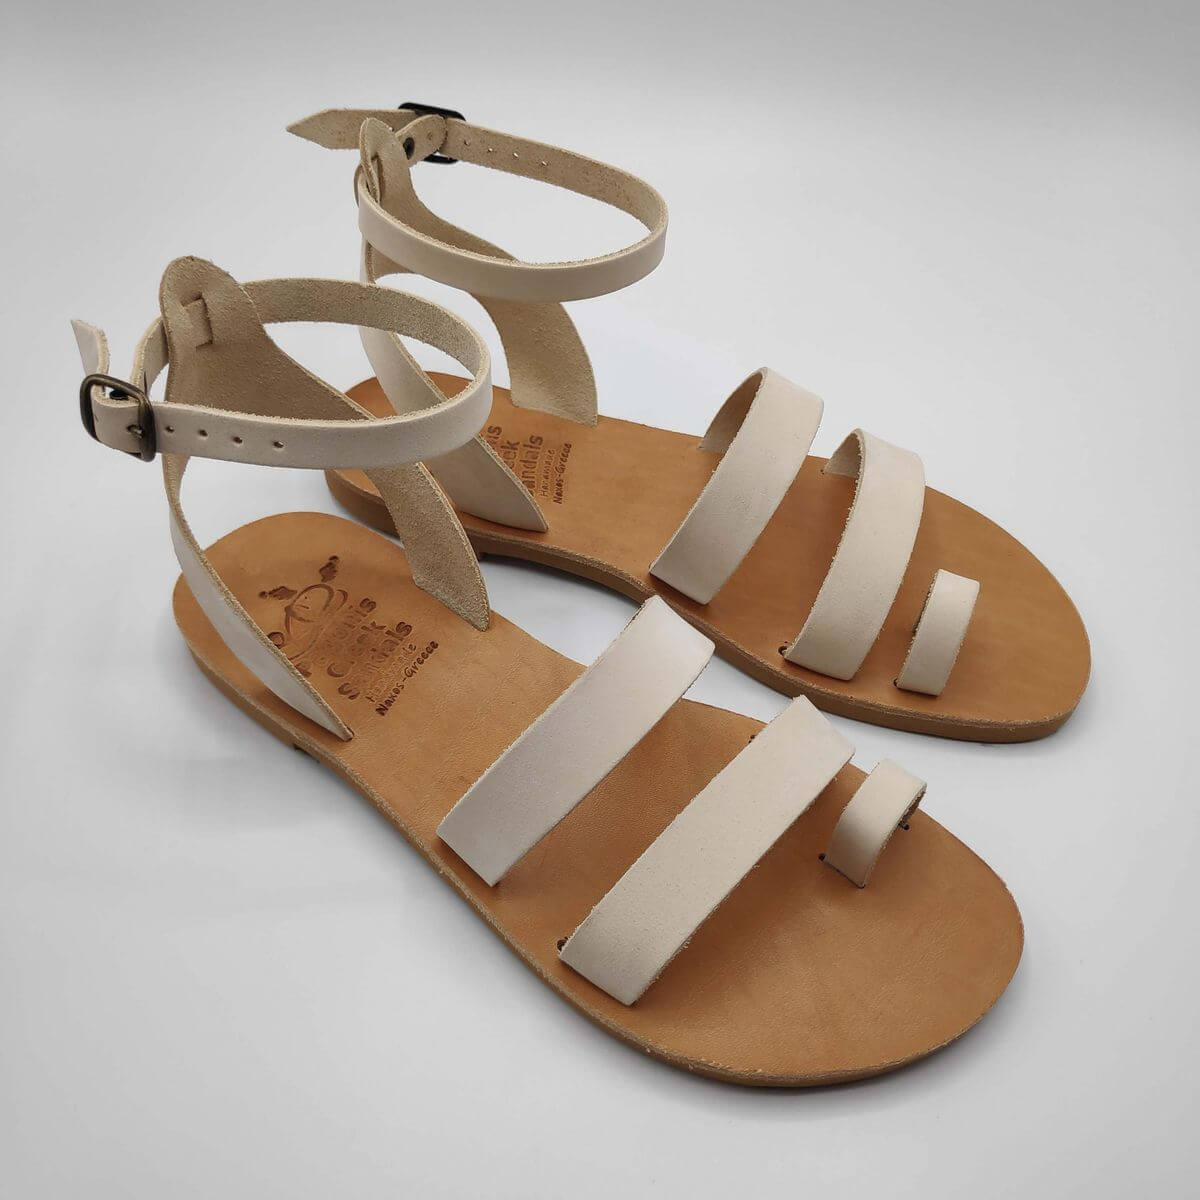 White nubuck leather dressy sandals with two straps, toe ring and high ankle strap, side view